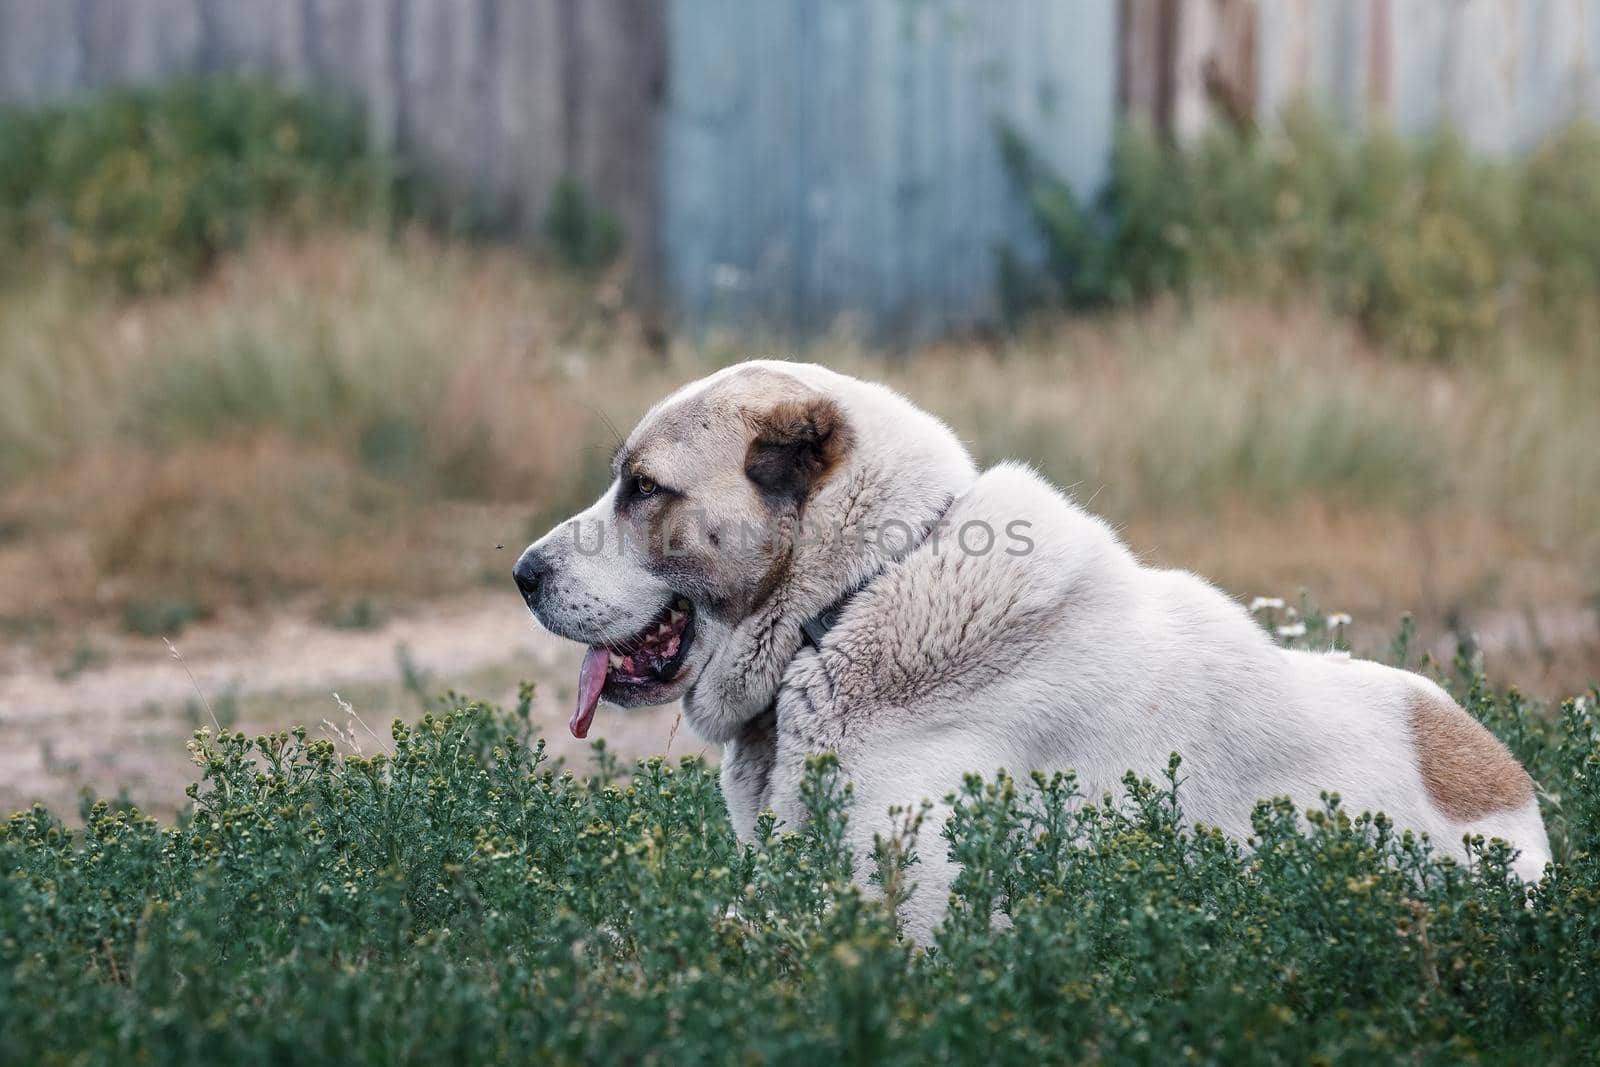 Central Asian Shepherd Dog lying in the yard among the green grasses